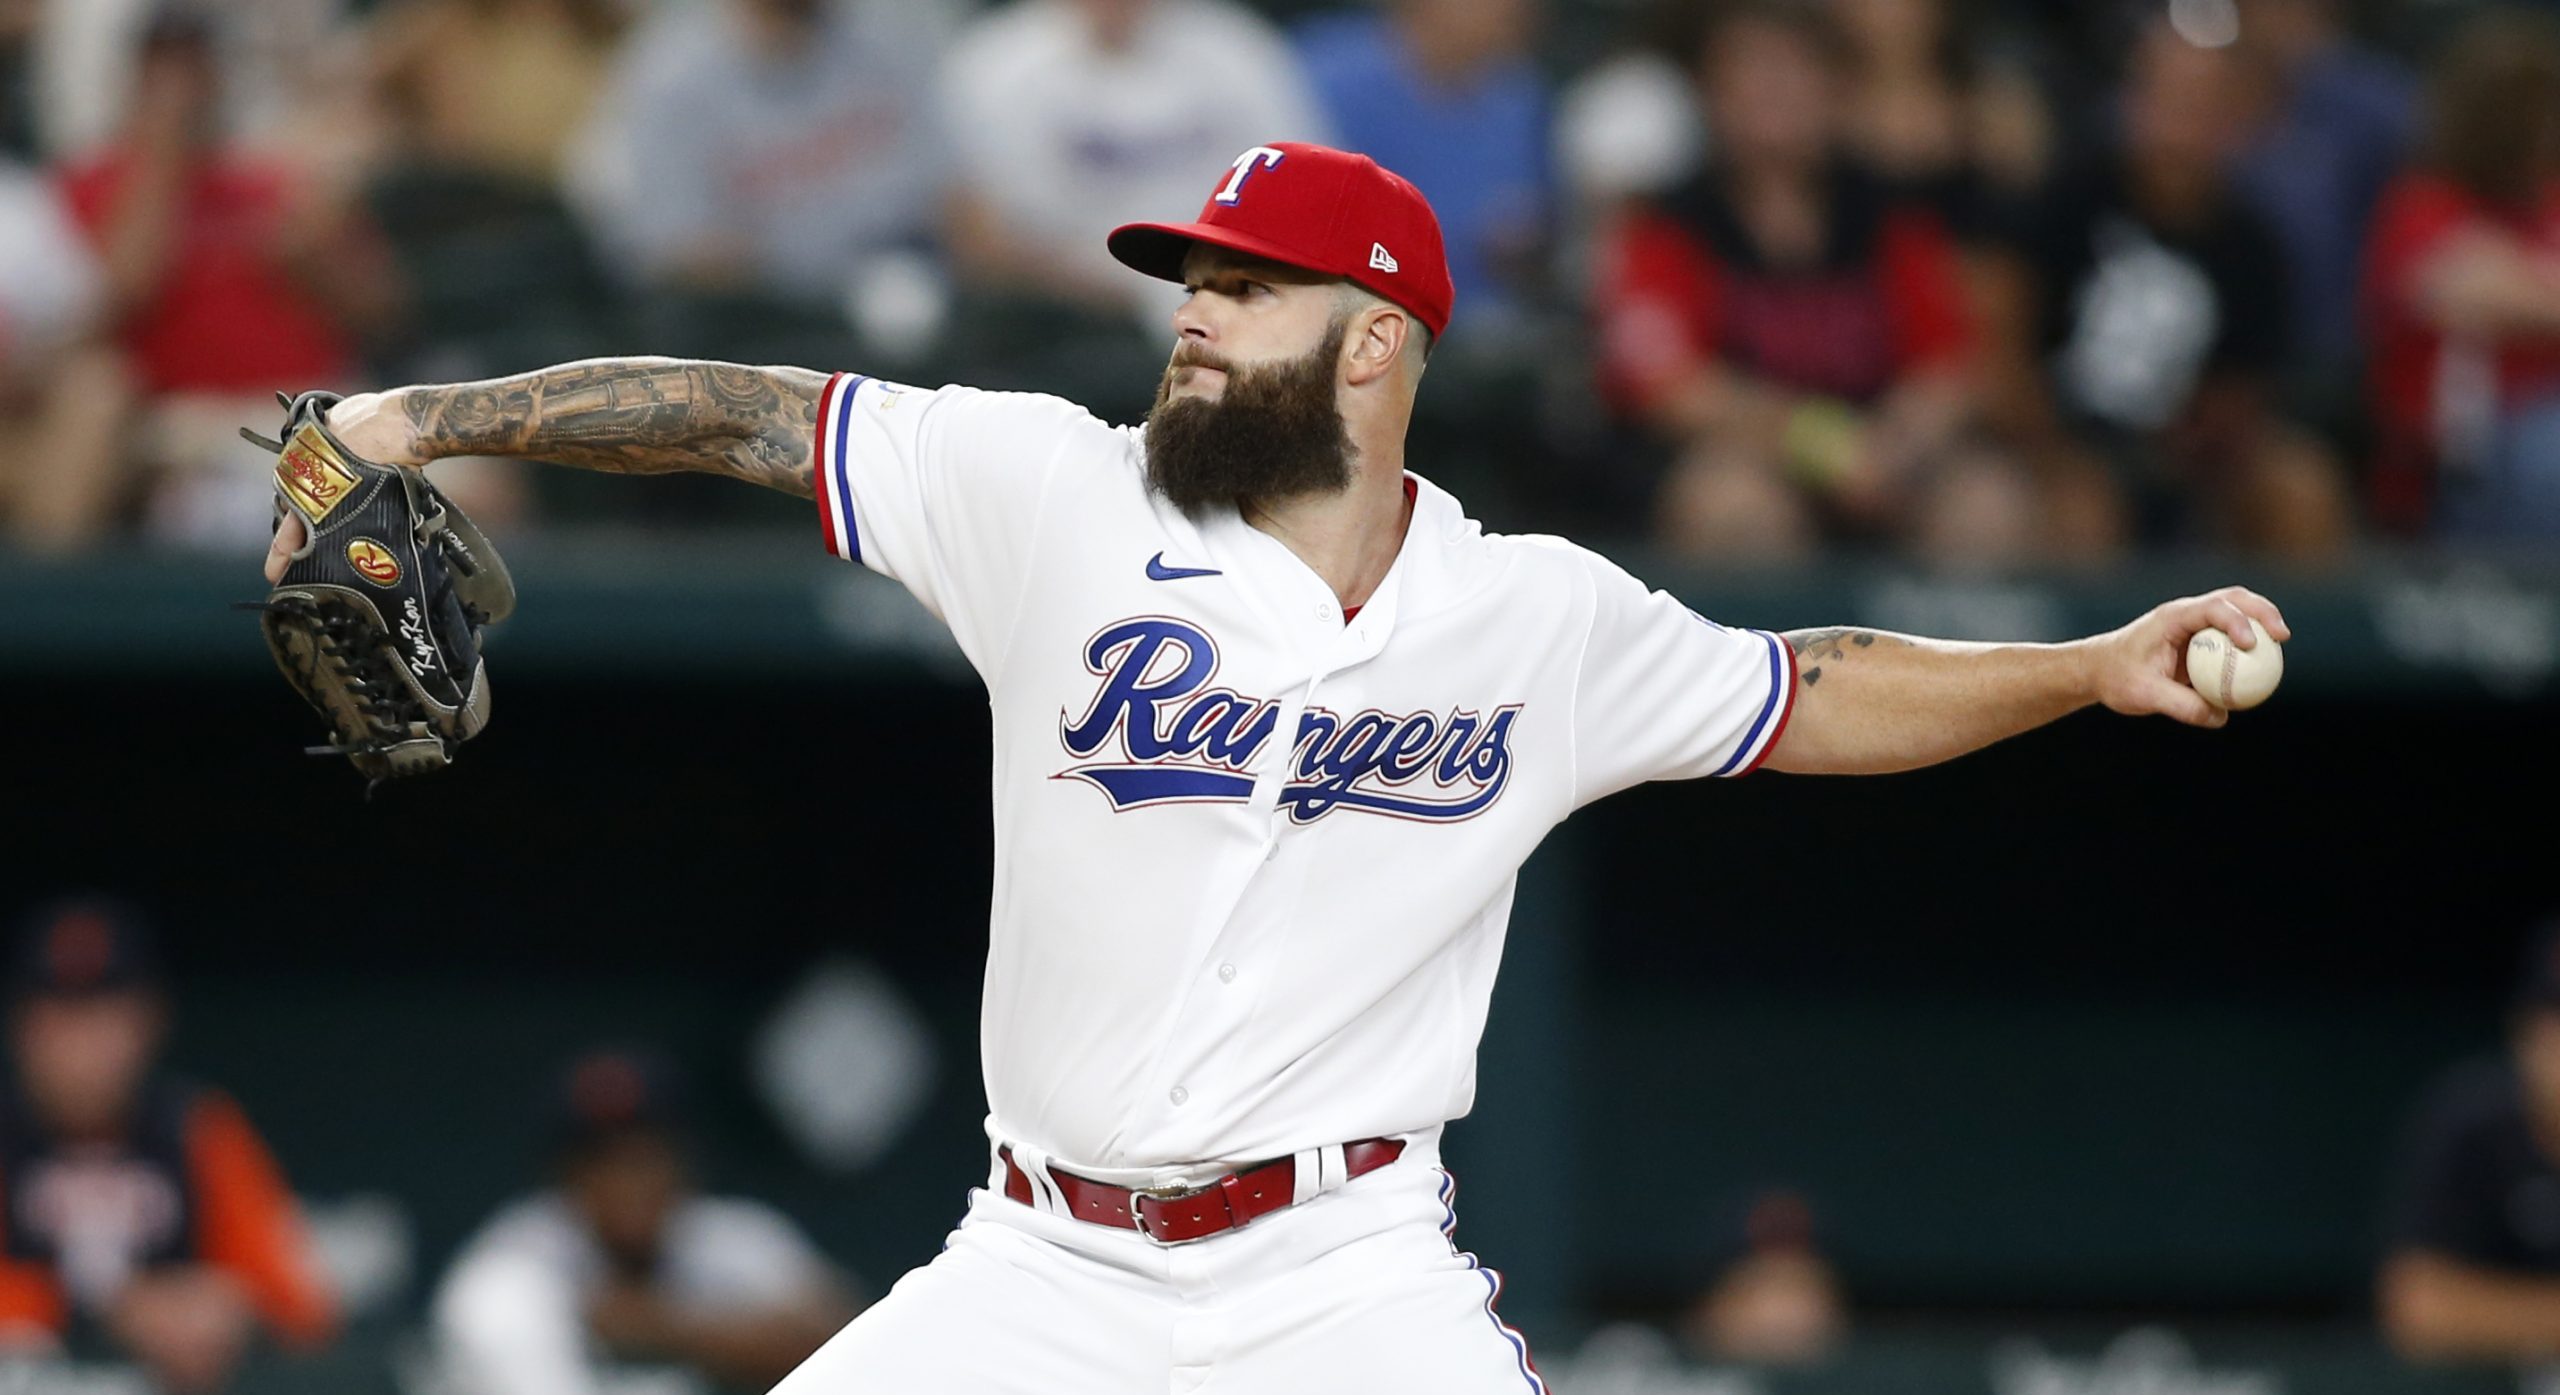 Dallas Keuchel's recent form in the minors suggests that a return to MLB may be in play for the 2023 season. Photo Credit: Tim Heitman-USA TODAY Sports